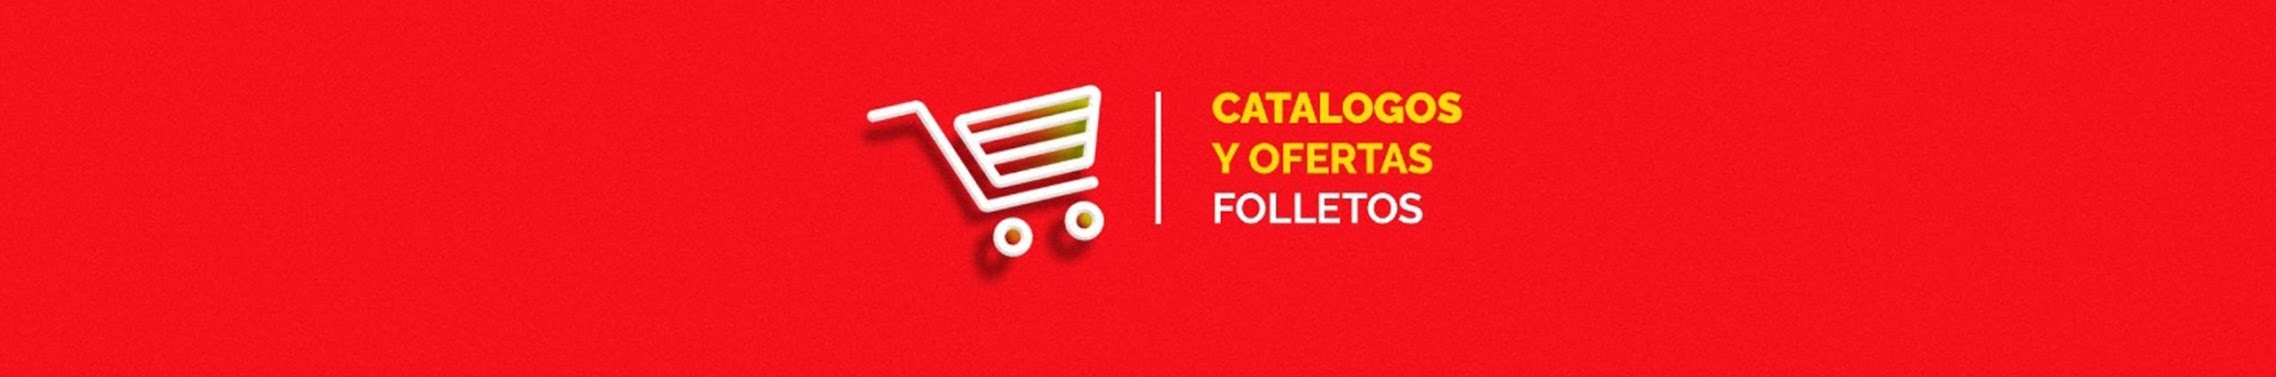 Catálogos Ofertas y Folletos YouTube Channel Analytics and Report - Powered  by NoxInfluencer Mobile